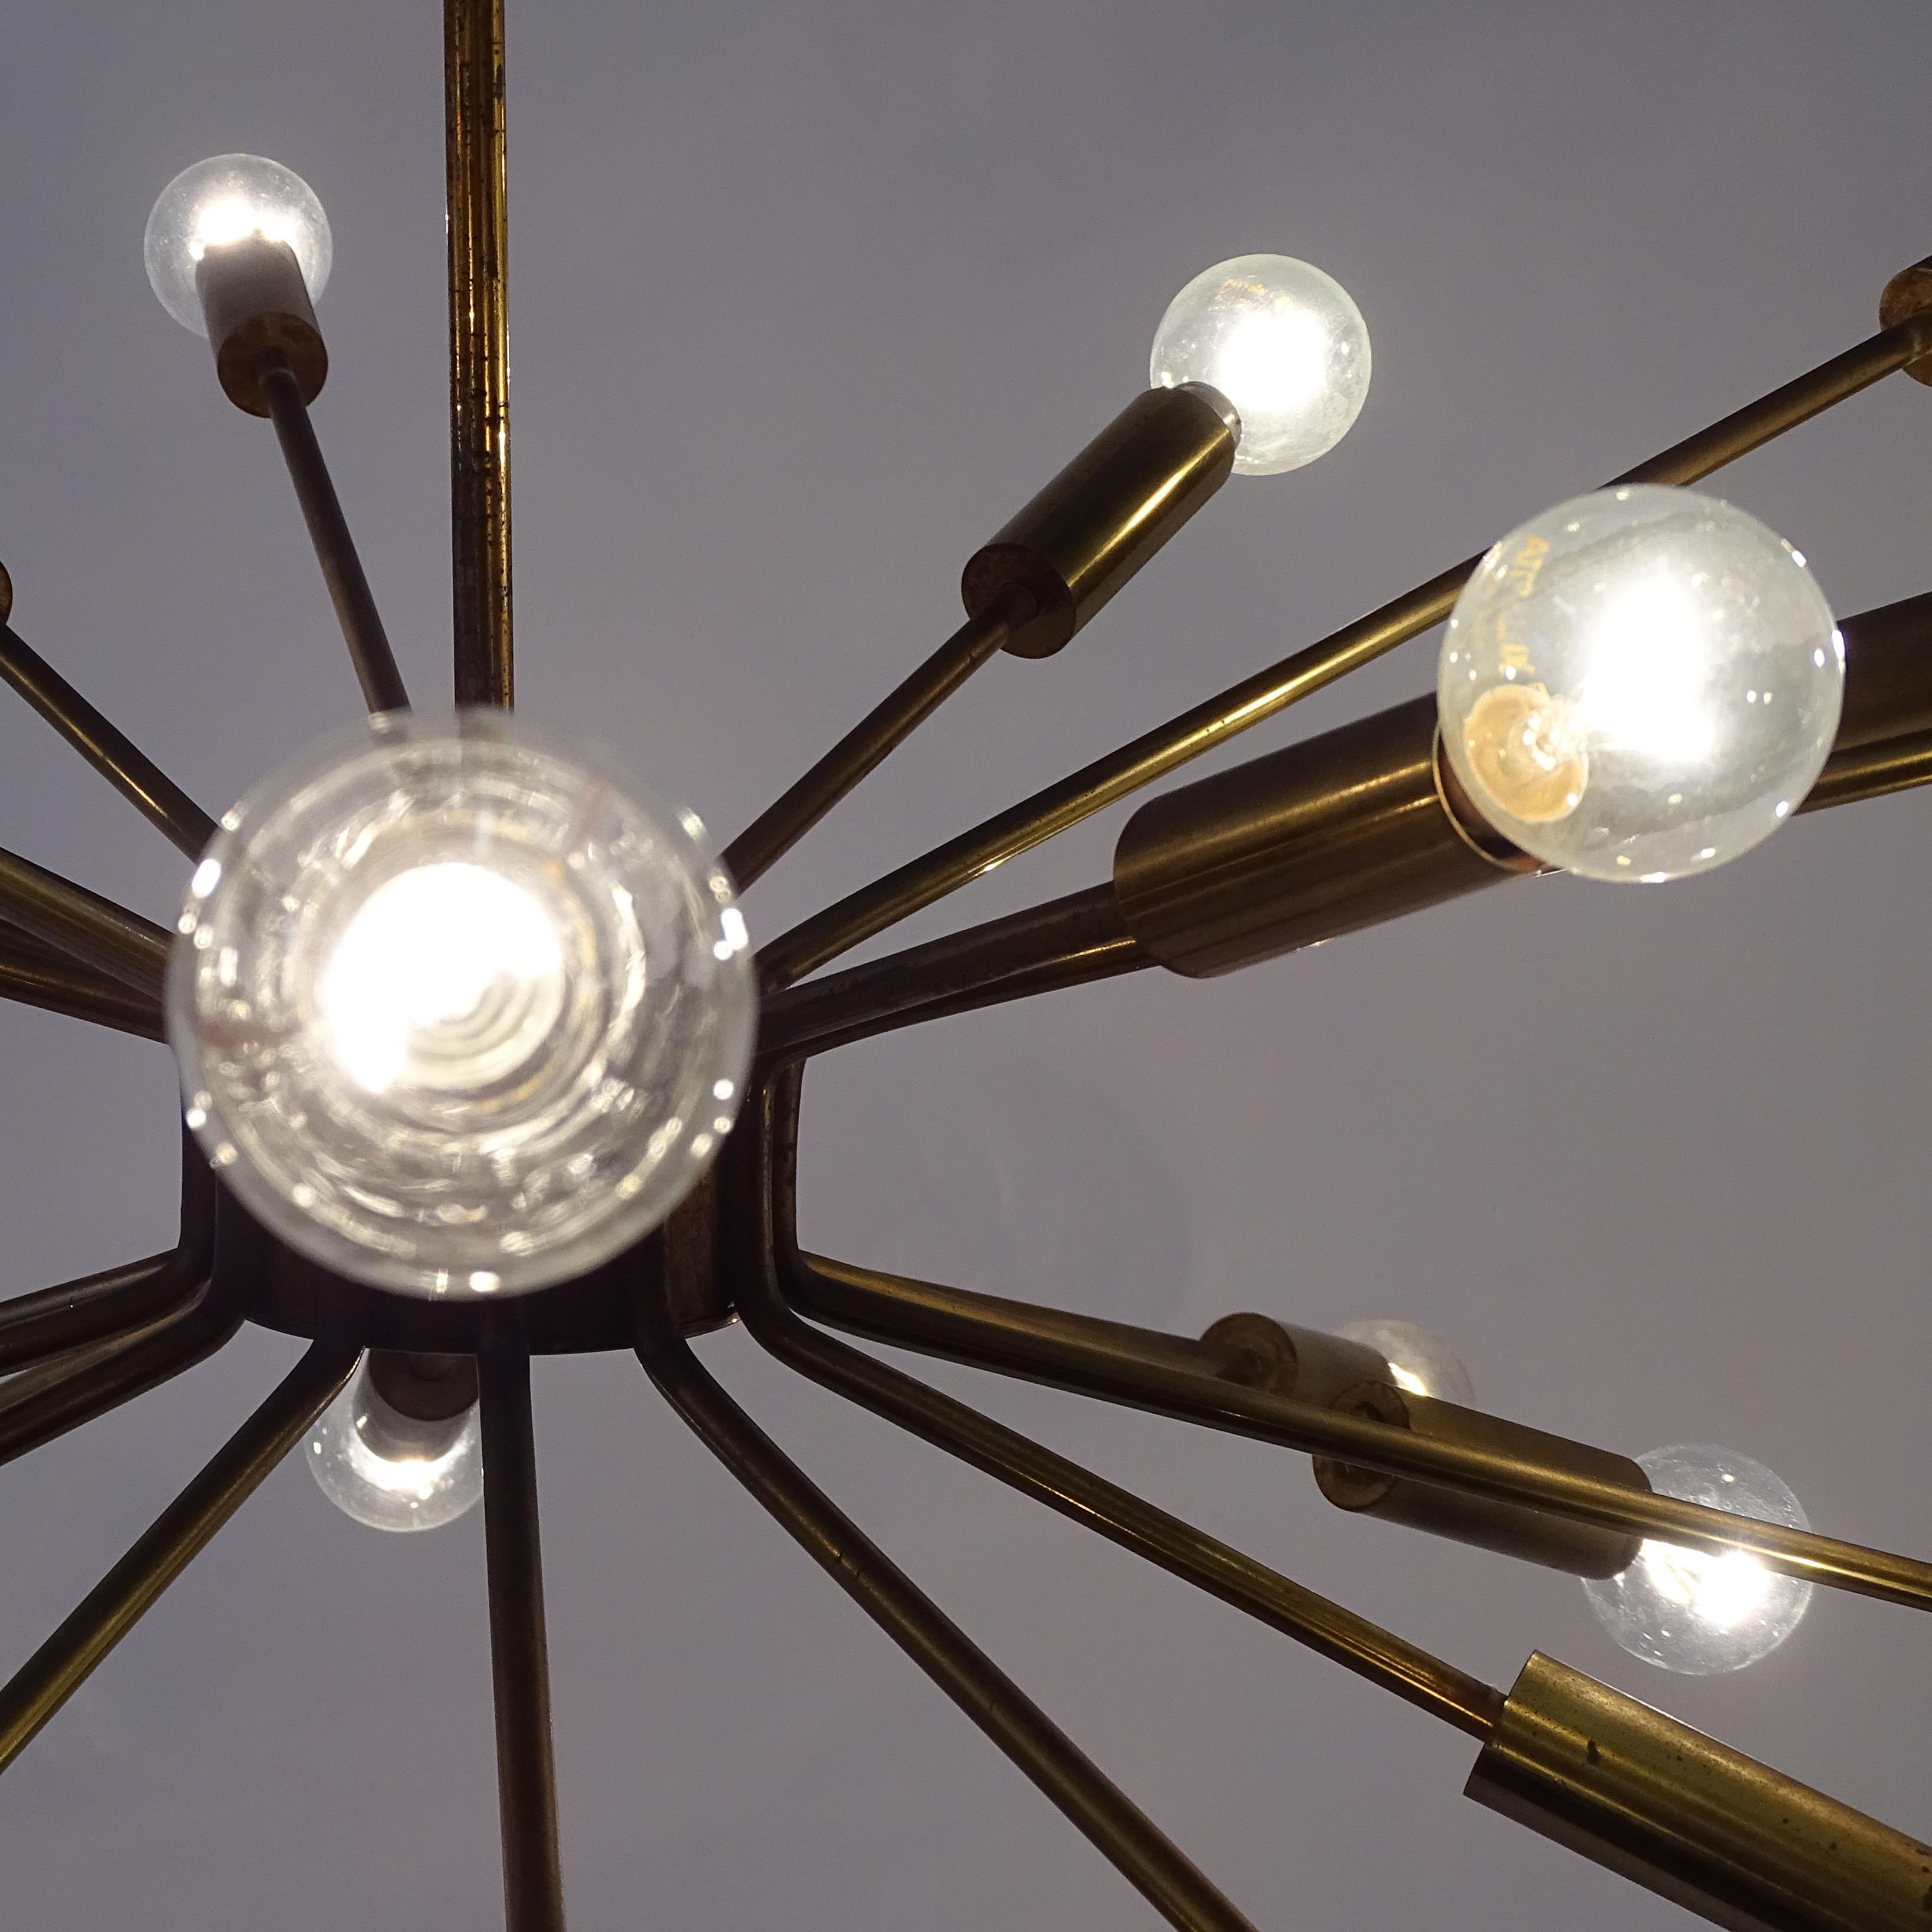 Gino Sarfatti for Arteluce 'Fireworks' Brass Ceiling Lamp, Italy 1939 In Good Condition For Sale In Milan, IT